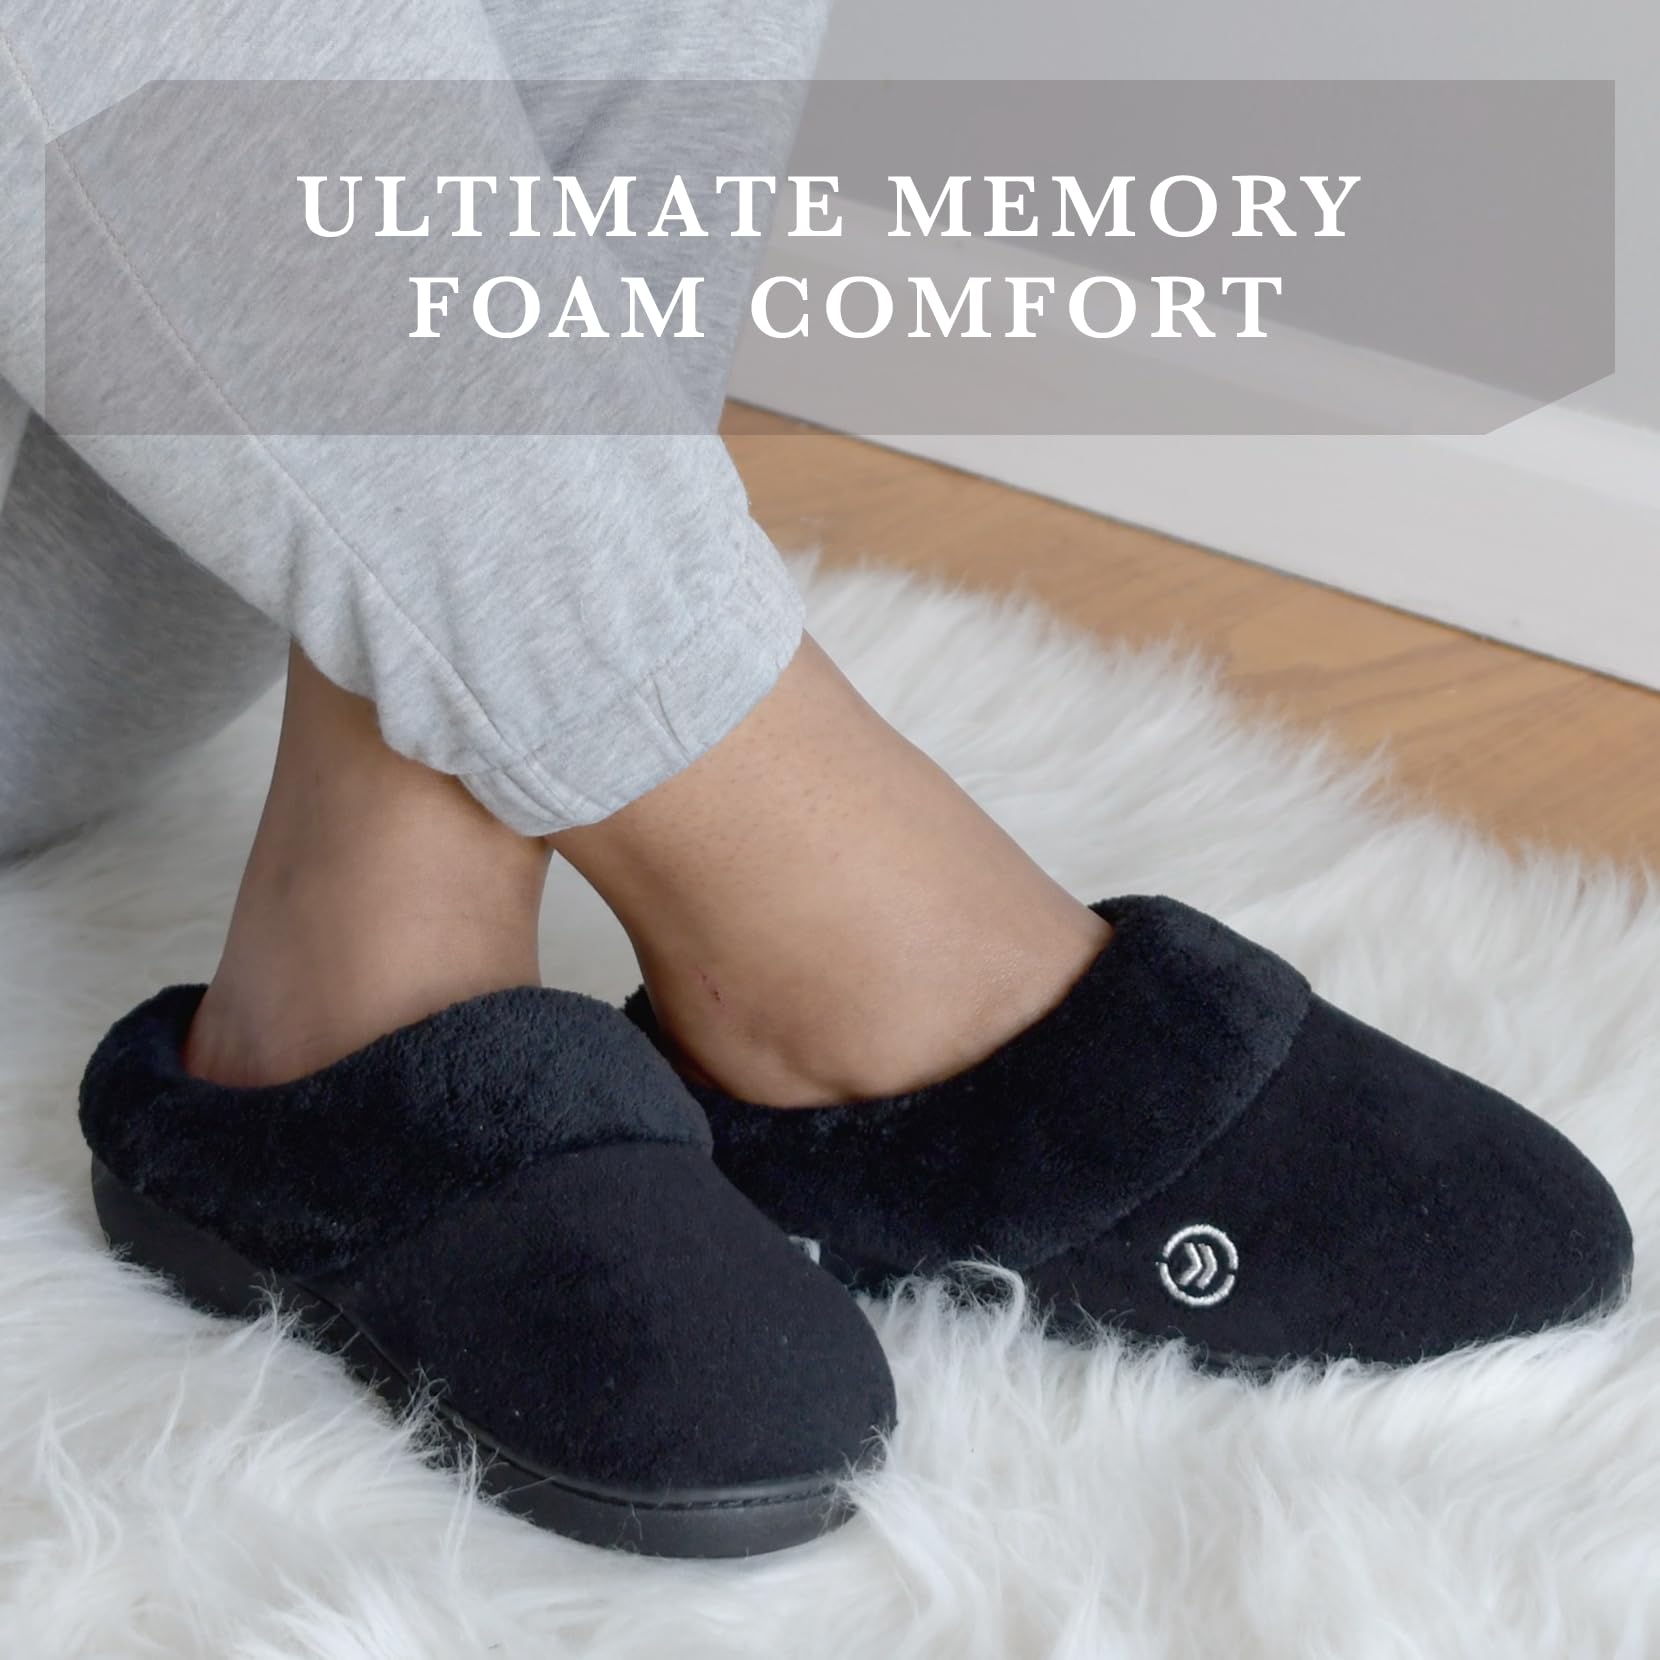 Isotoner Women’s Terry Clog Slippers: Arch Support, Anti-Slip Sole, Indoor/Outdoor, Plantar Fasciitis Relief, Fluffy Slippers, Comfortable Nursing Shoes, Non-Slip, Memory Foam